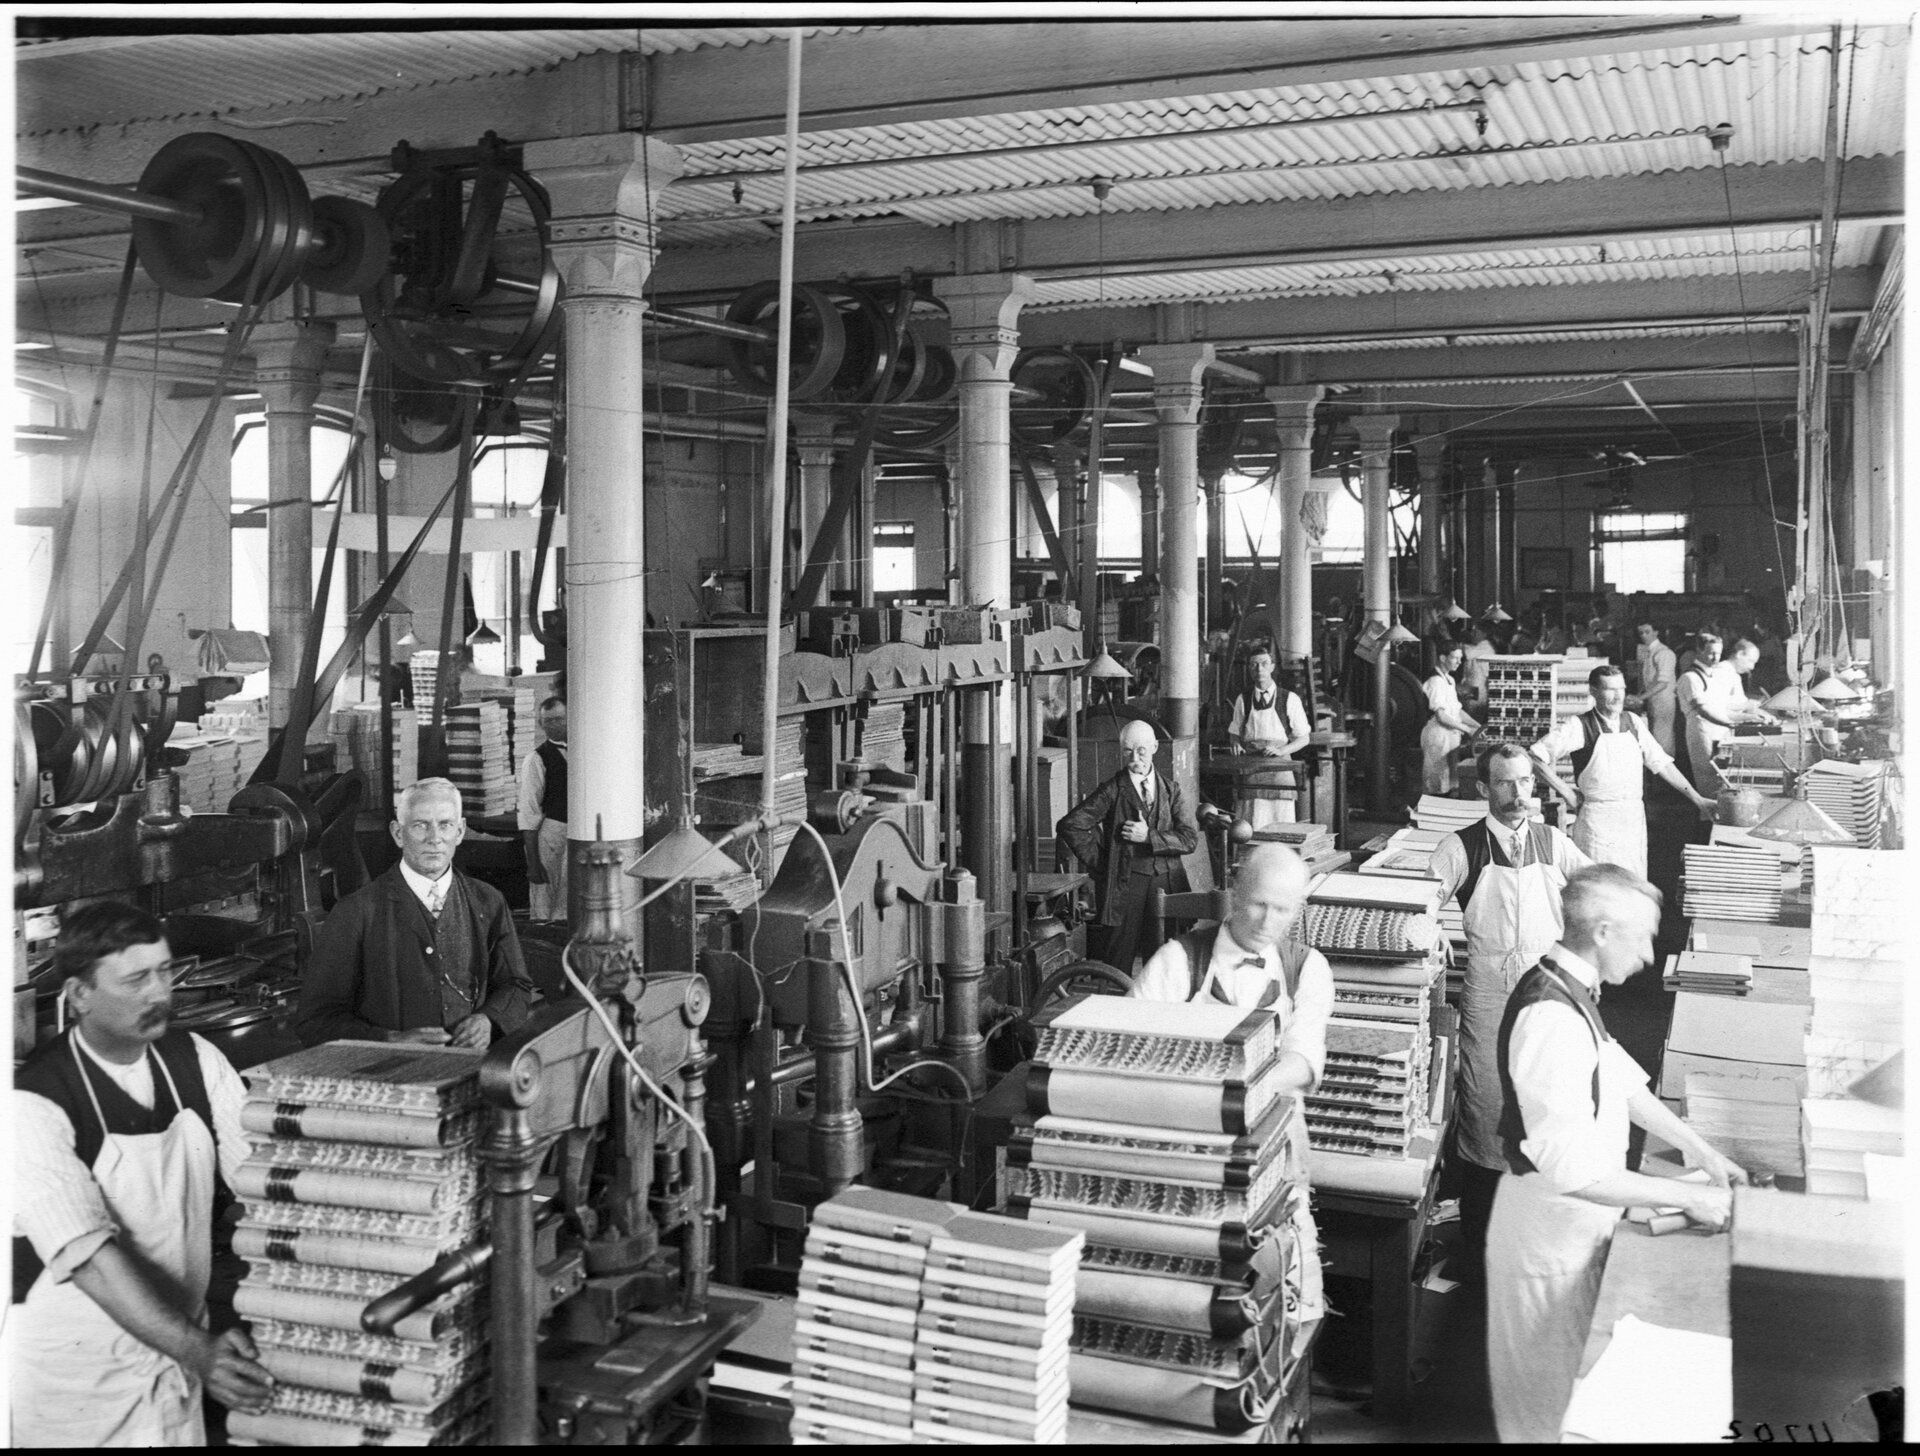 Men in work aprons stand in a workshop behind stacks of large hardcover books